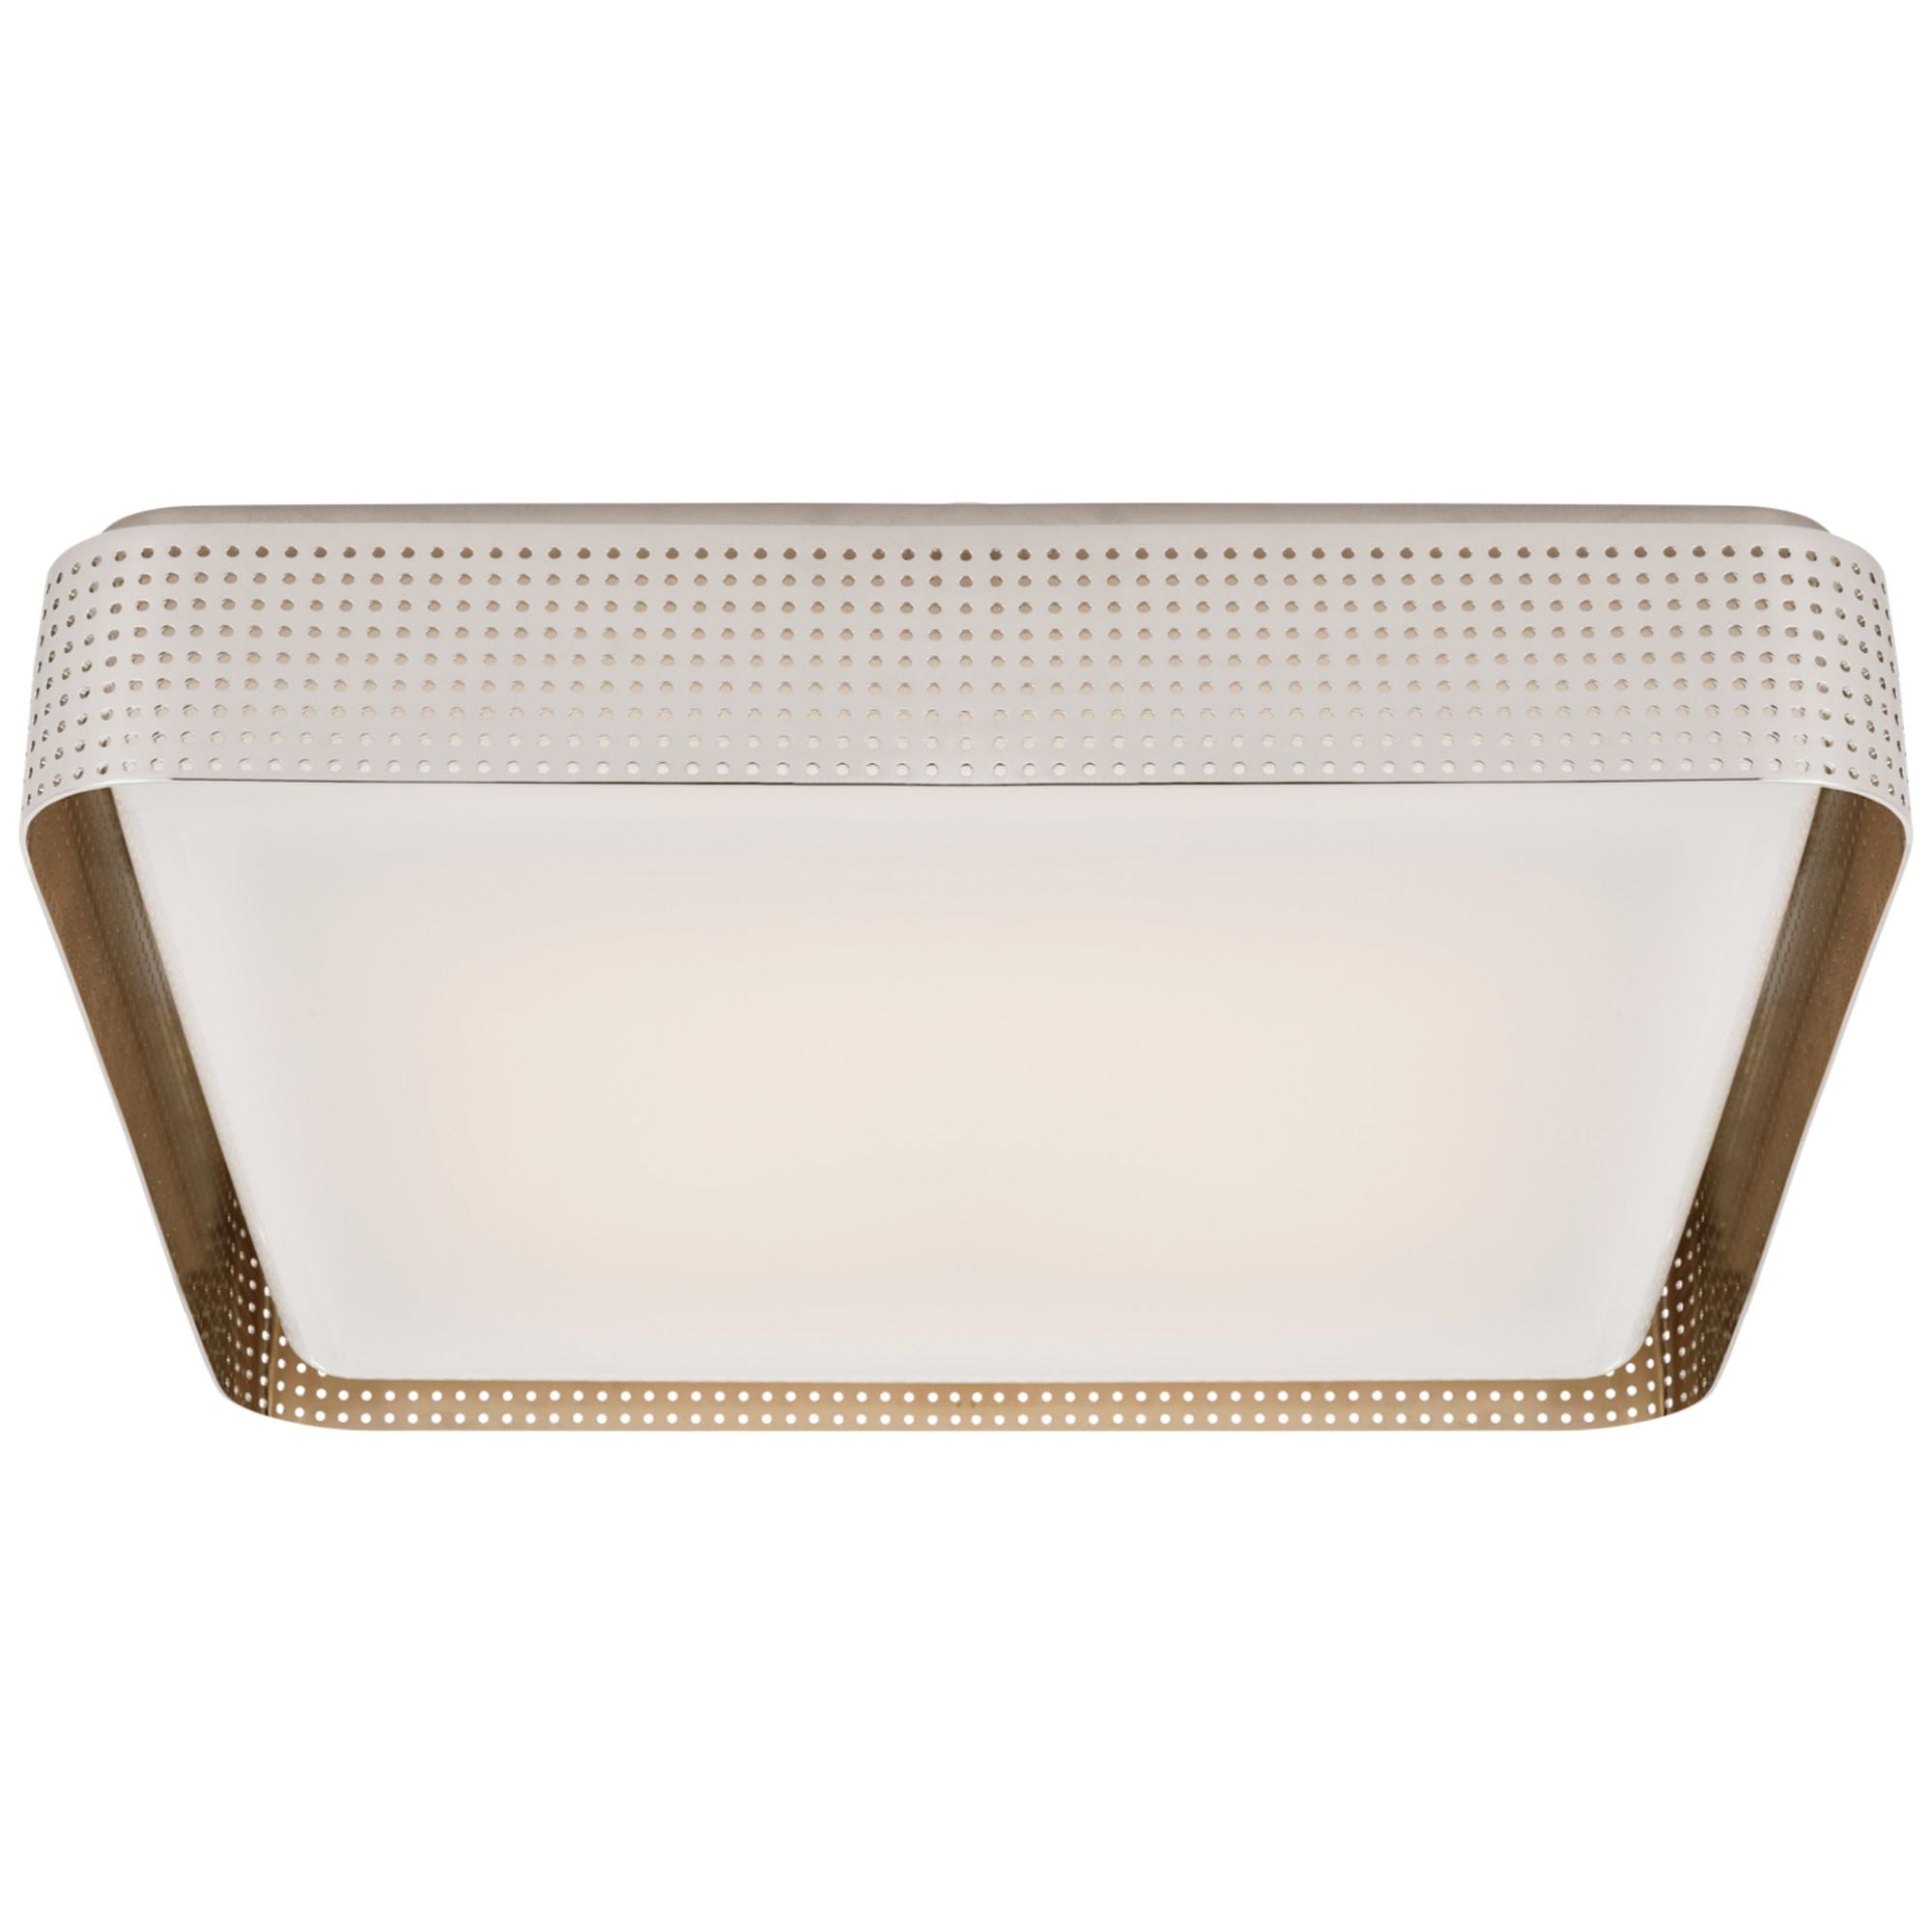 Kelly Wearstler Precision 20" Square Flush Mount in Polished Nickel with White Glass